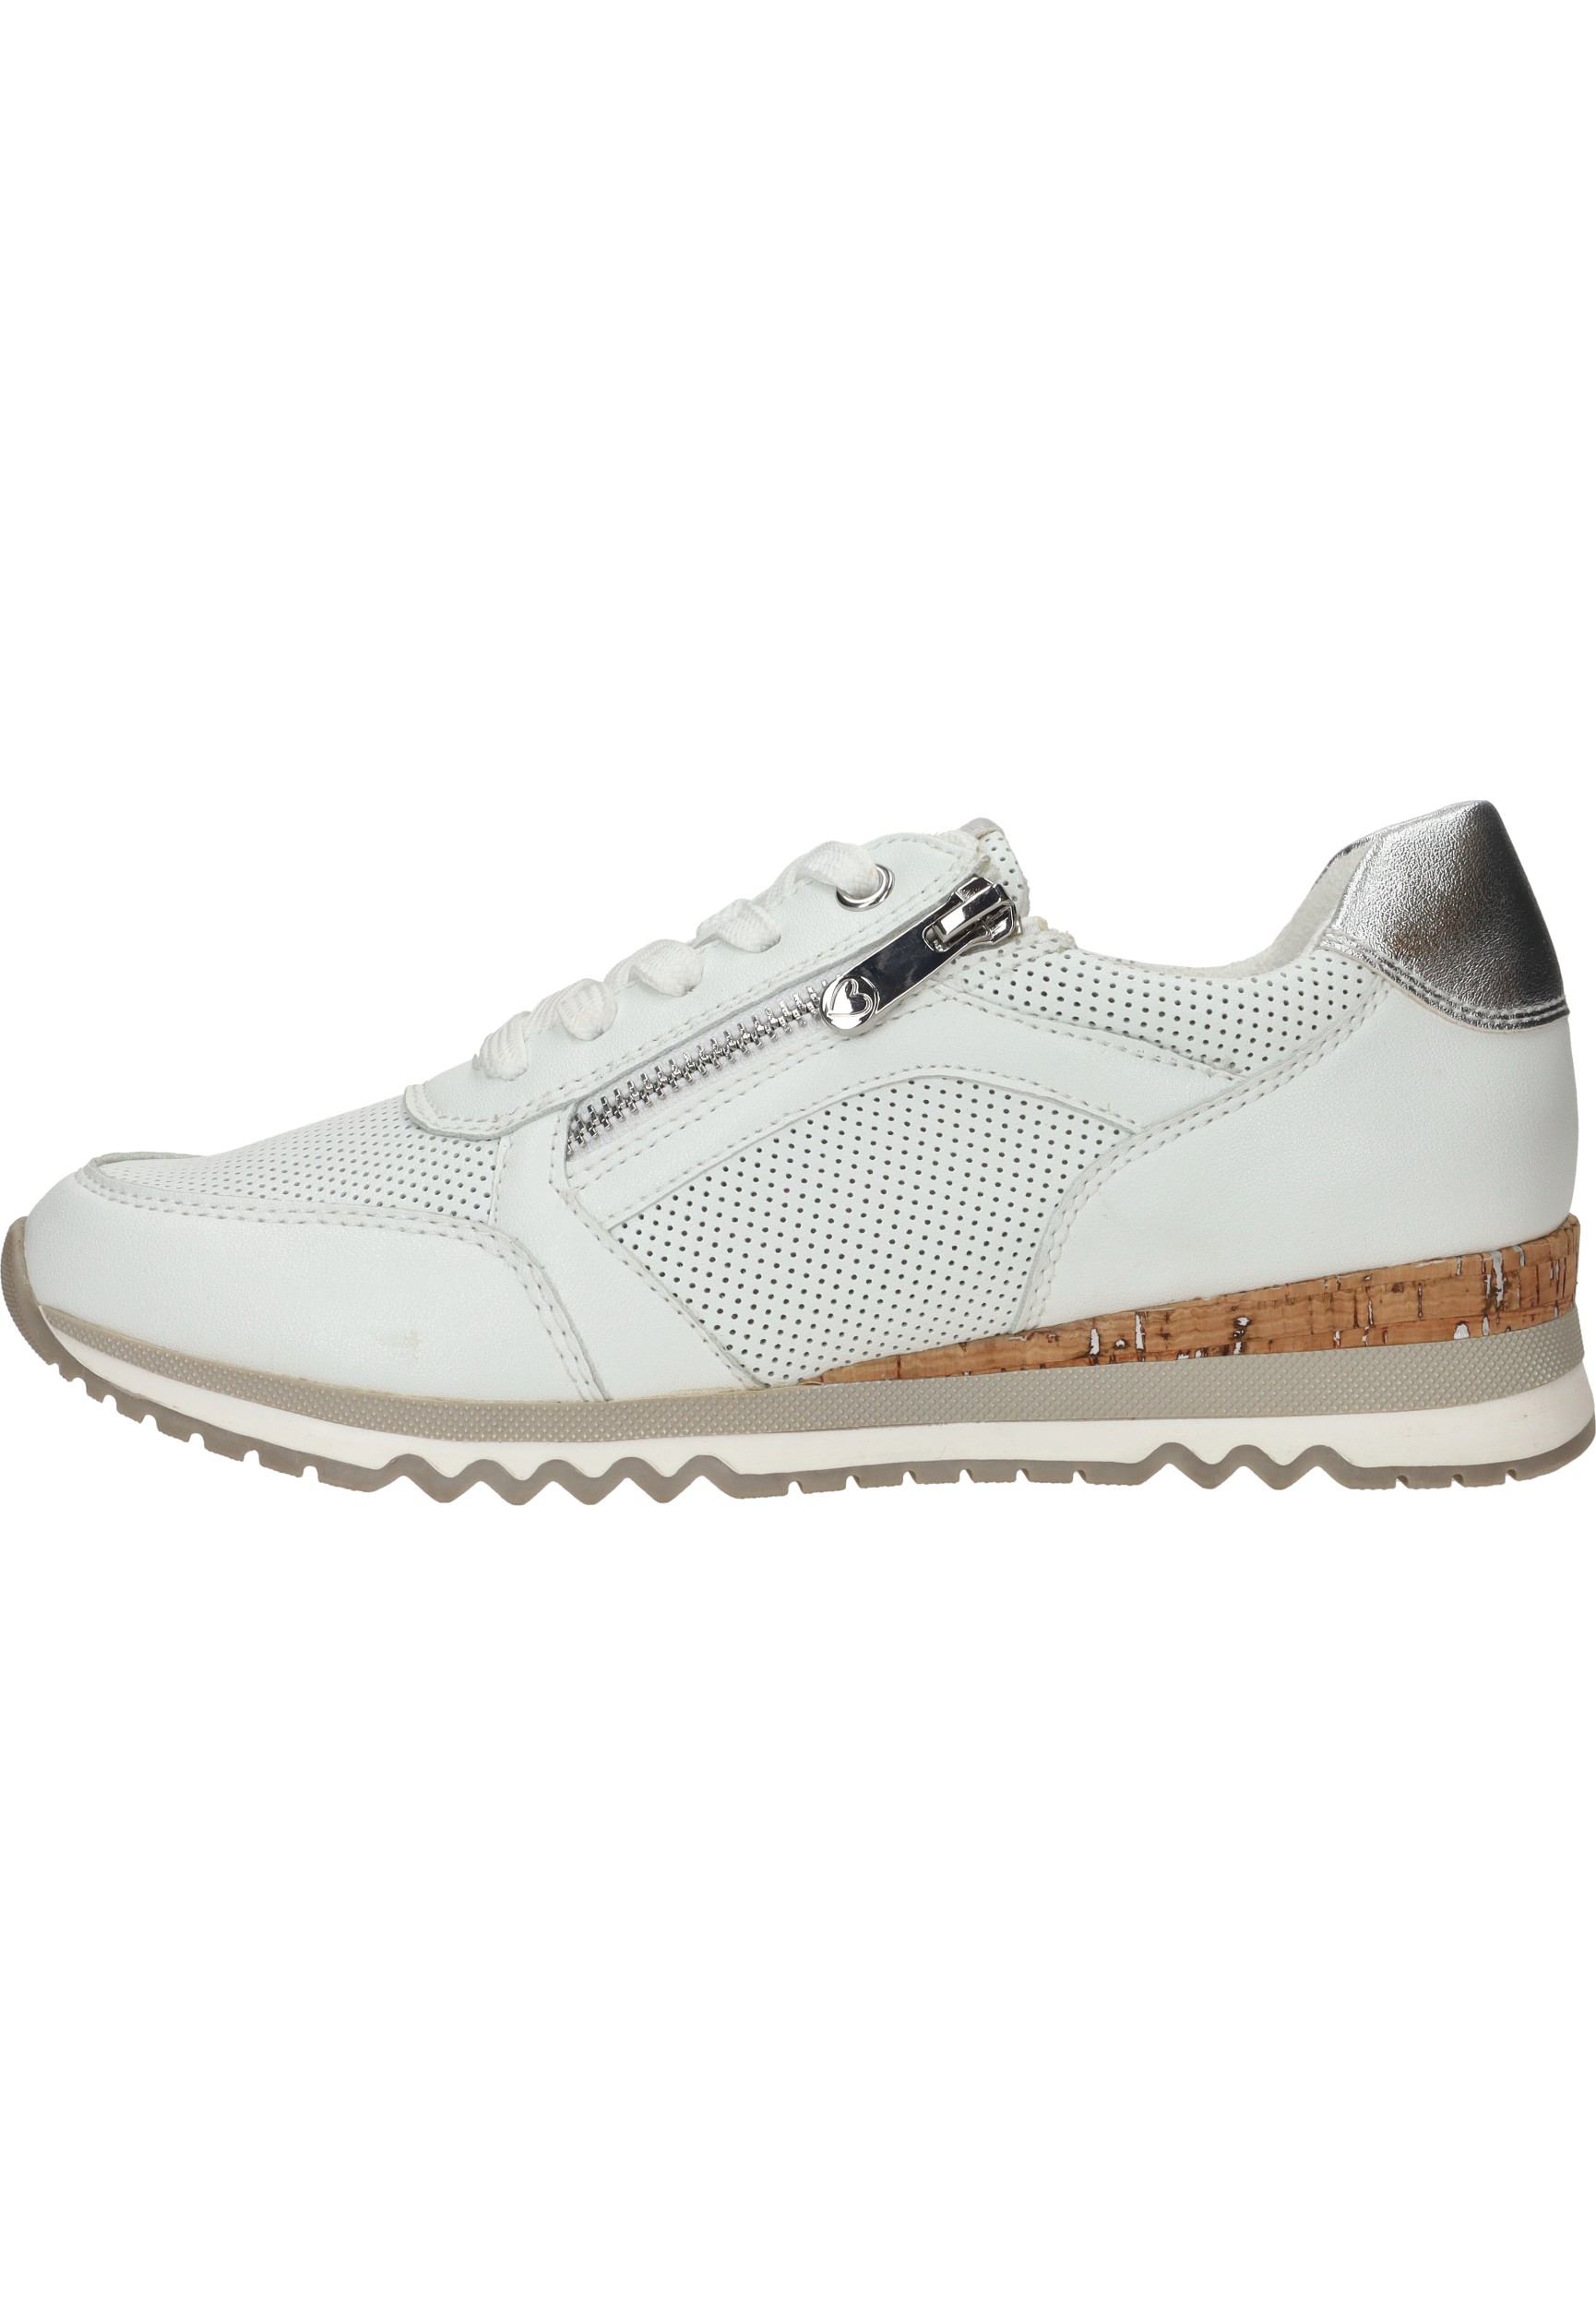 MARCO TOZZI MT Vegan, Soft Lining + Feel Me - removable insole Dames Sneaker - WHITE COMB - Maat 39